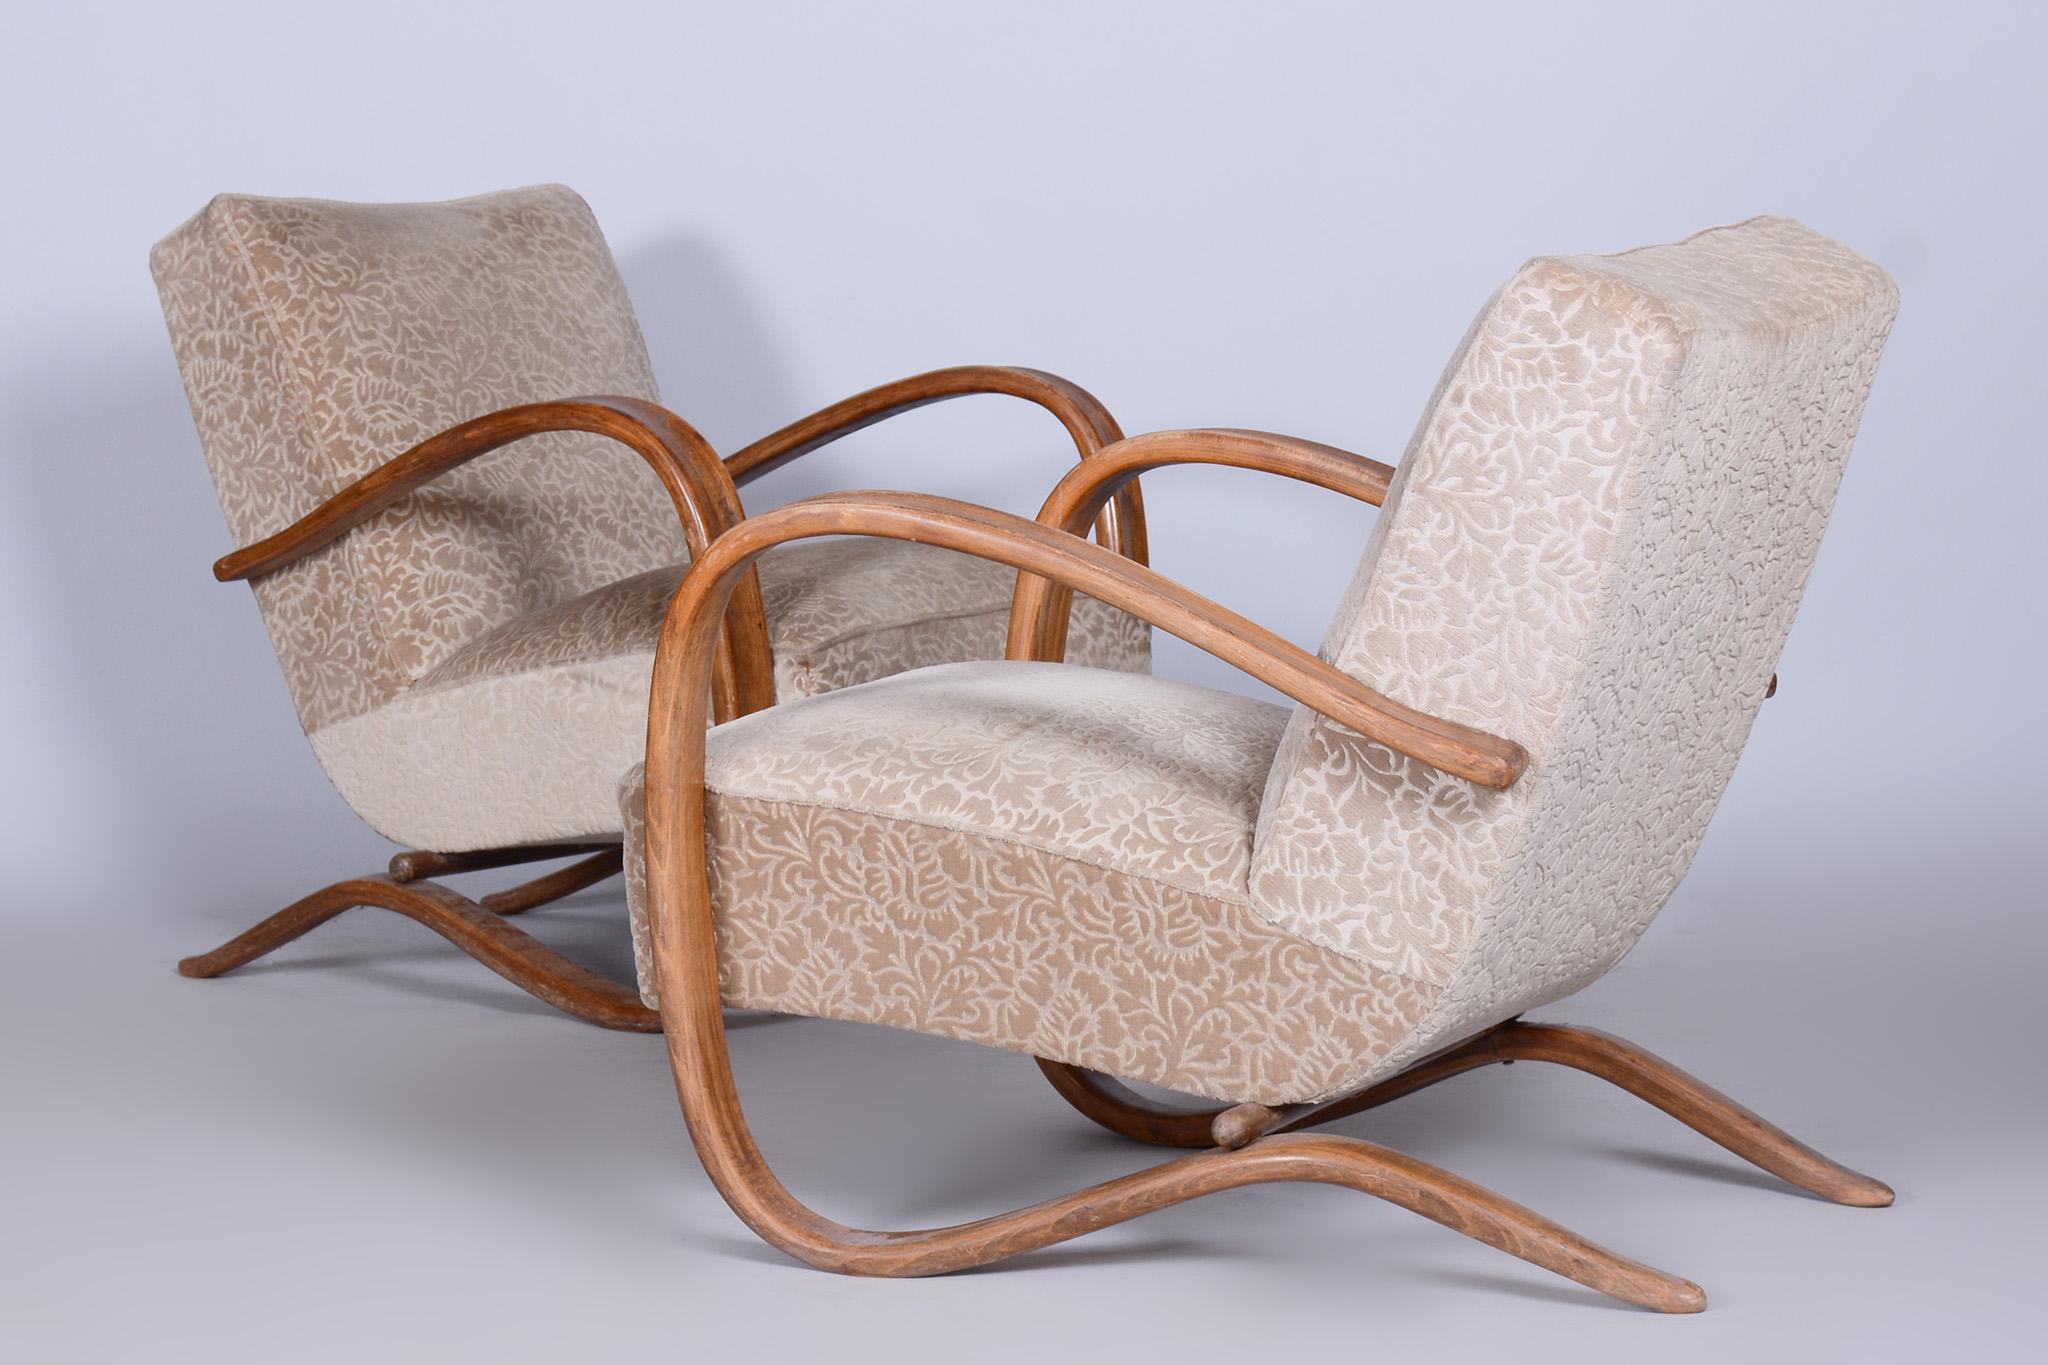 Czech Pair of Beige H-269 Armchairs Designed by Jindrich Halabala for UP Zavody, 1930s For Sale